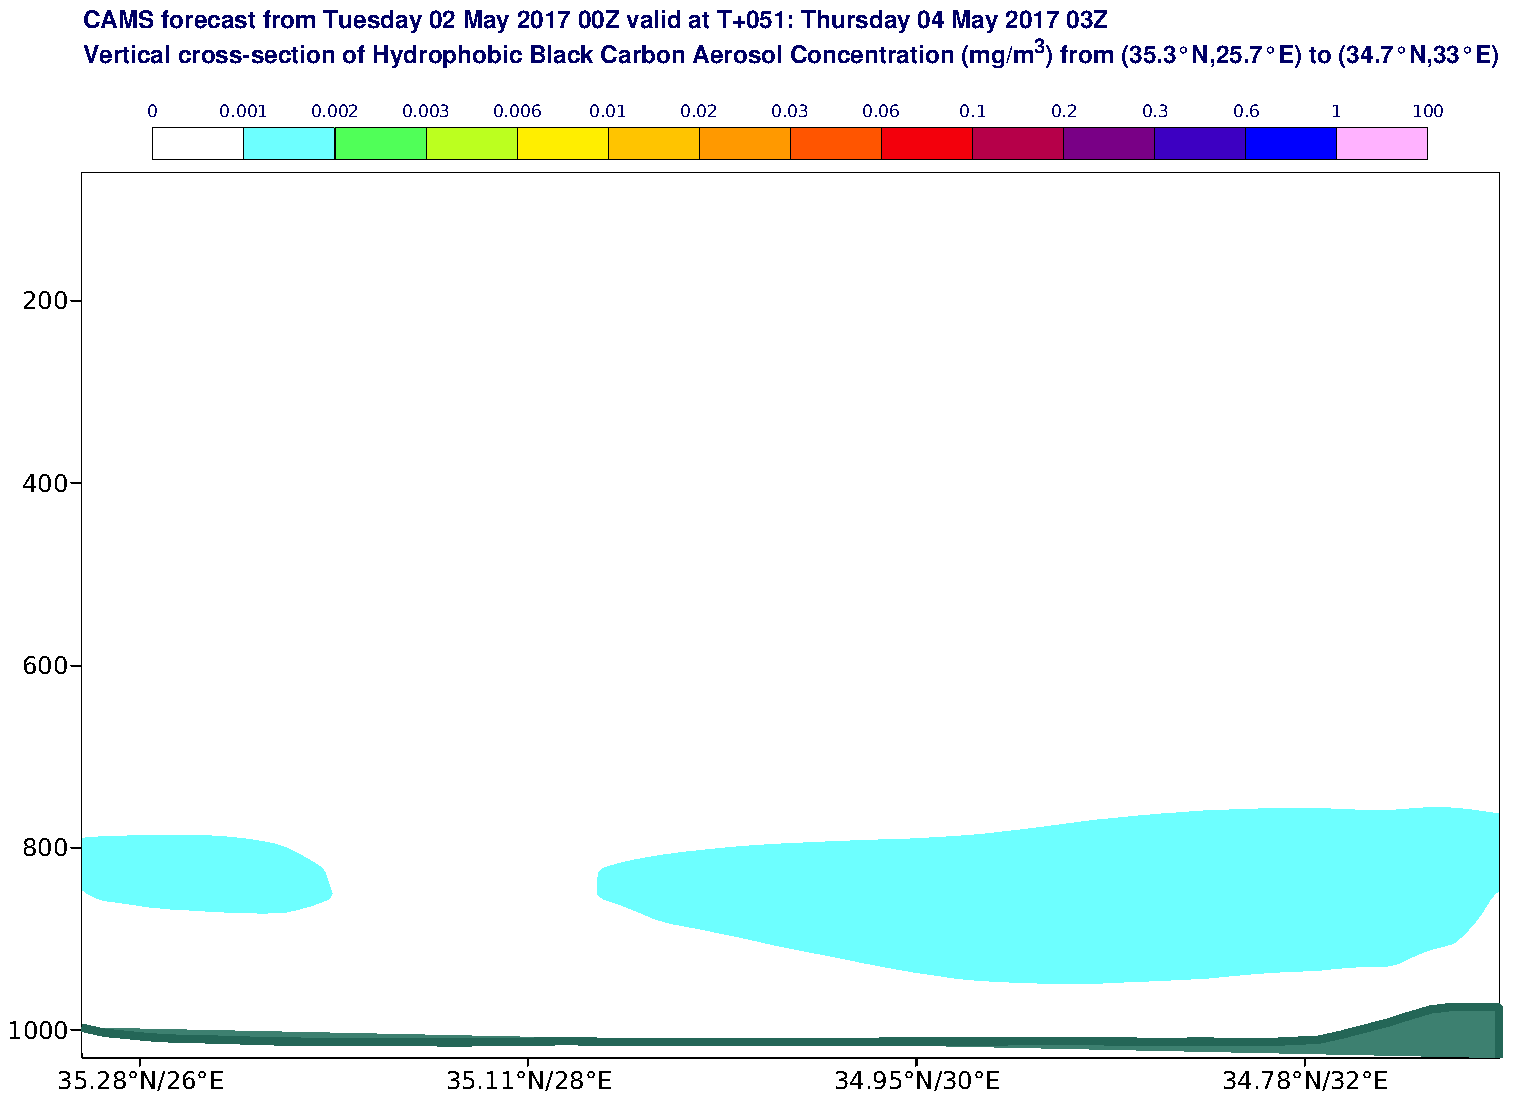 Vertical cross-section of Hydrophobic Black Carbon Aerosol Concentration (mg/m3) valid at T51 - 2017-05-04 03:00